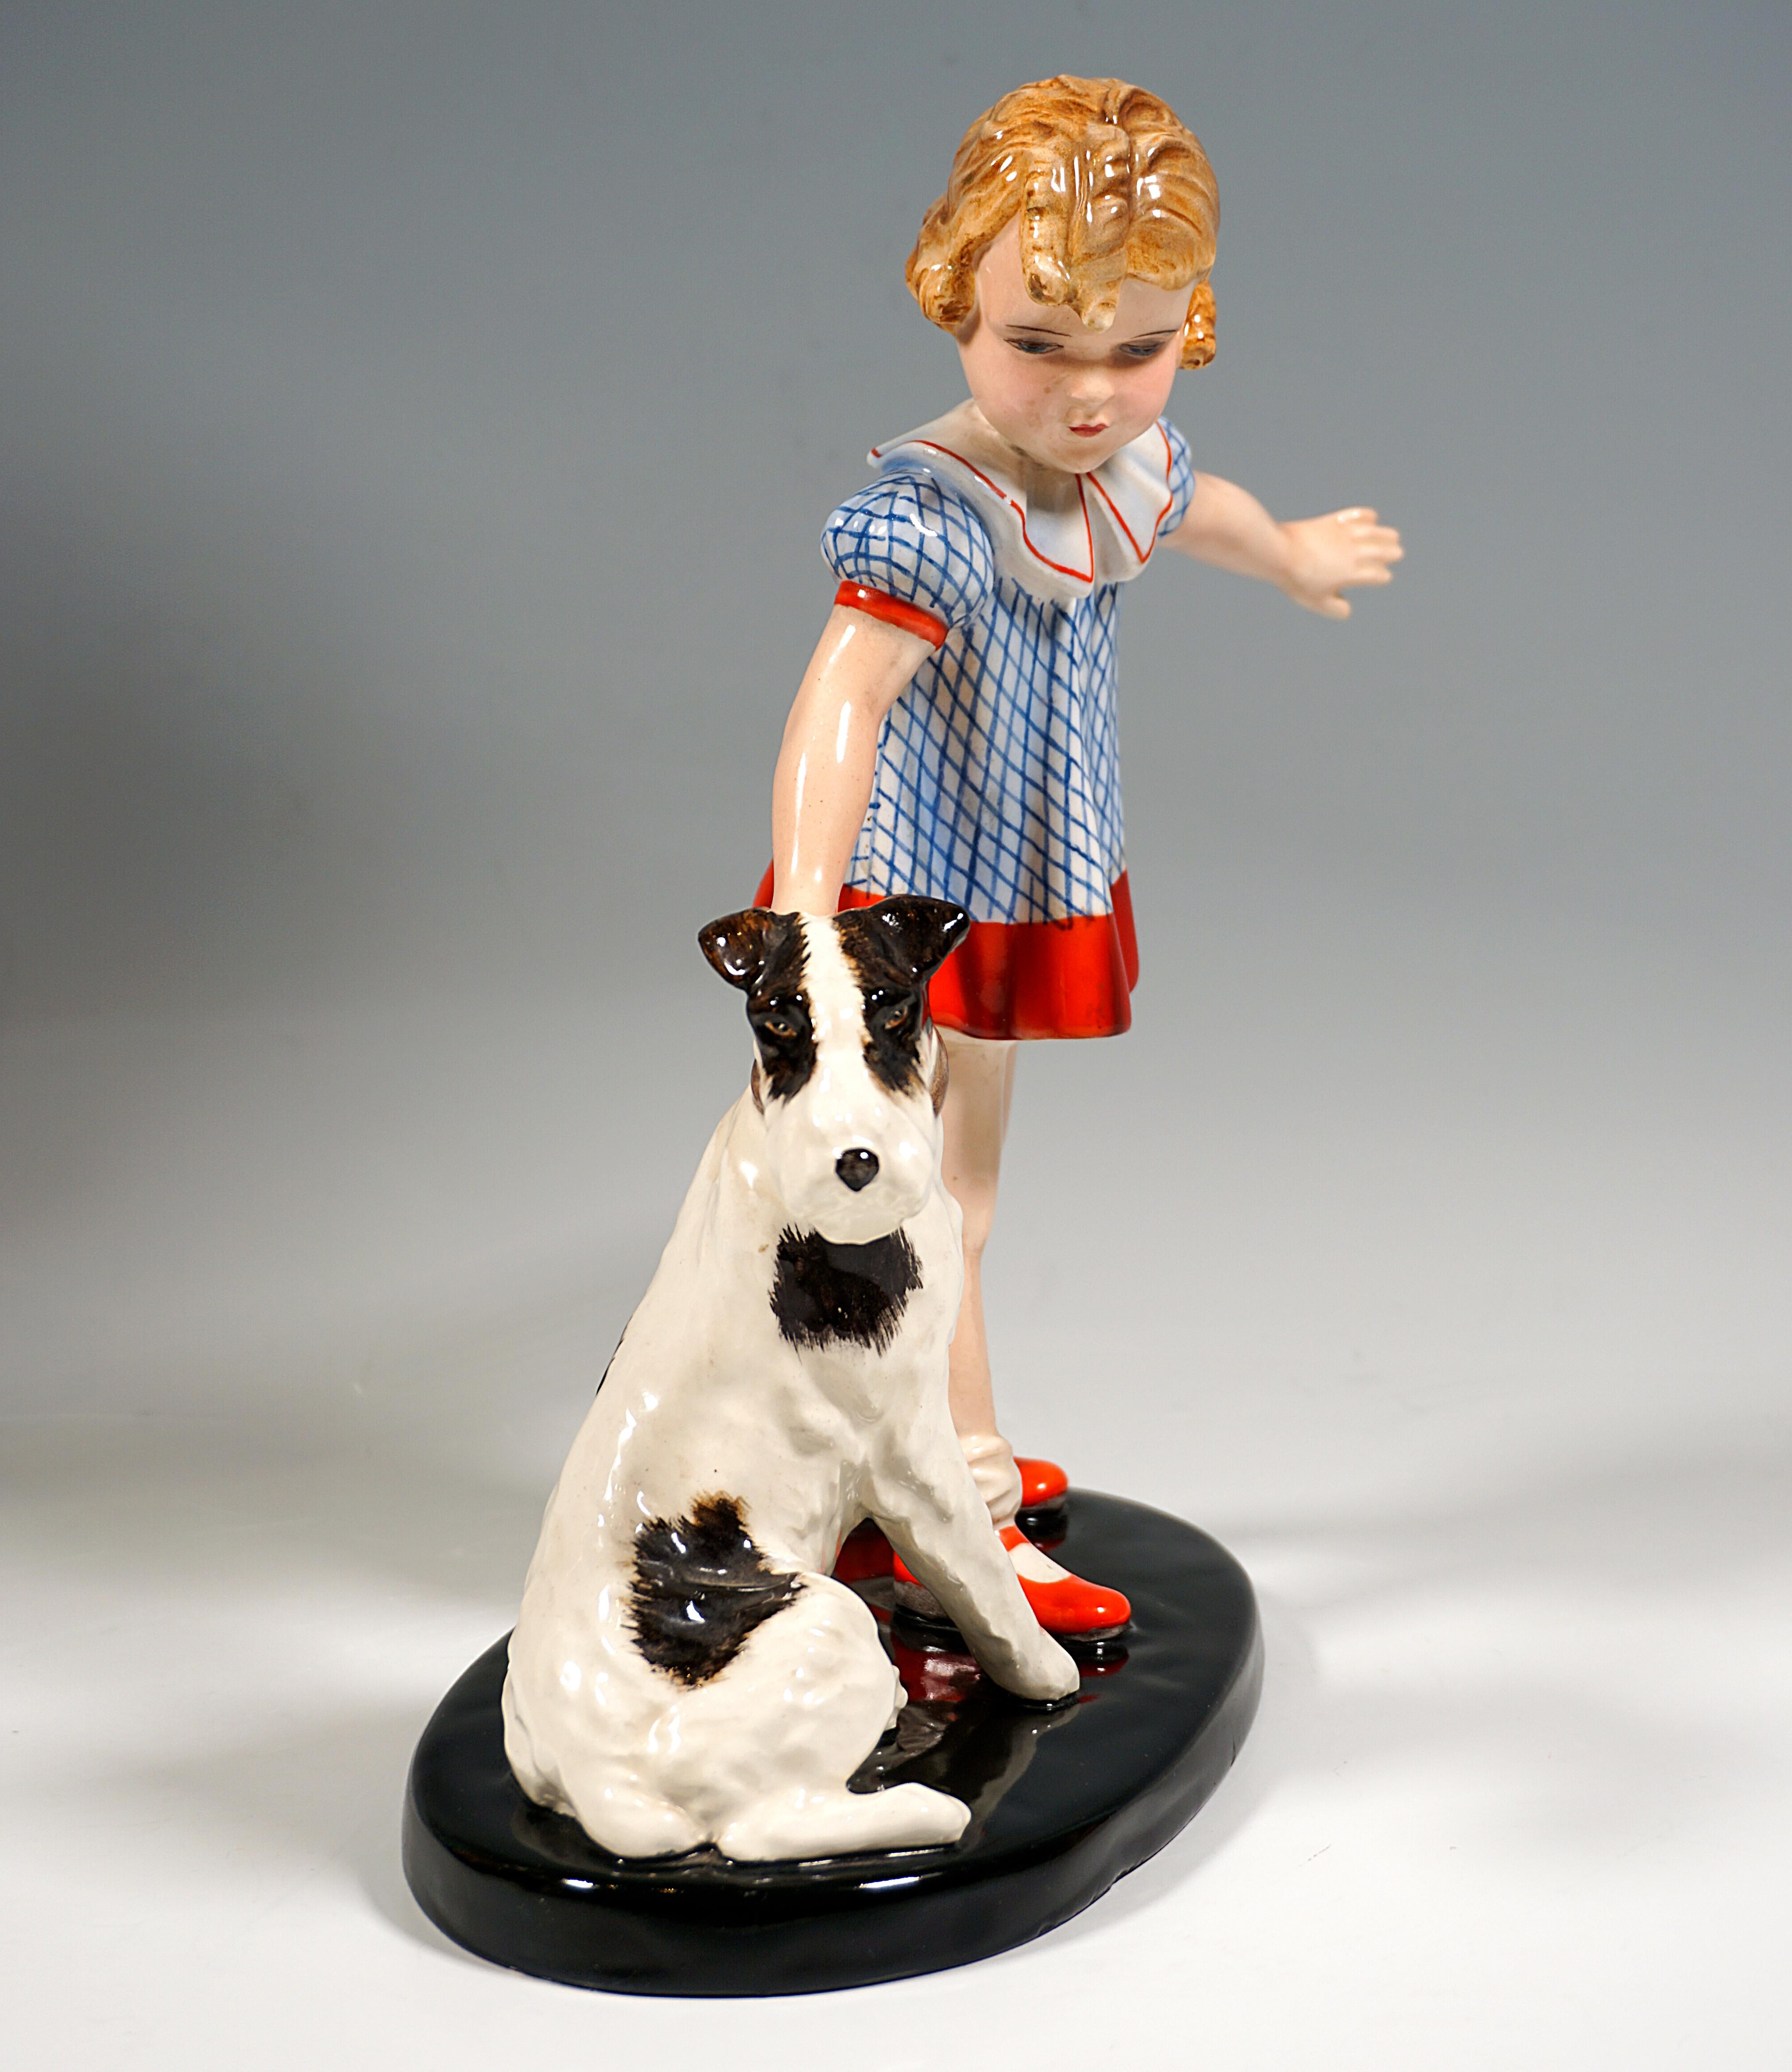 Rare Goldscheider Vienna Art Déco Art Ceramic Group of the late 1930s:
Little blond girl with curly hair in a white and blue checked summer dress with red edges holding a fox terrier sitting on the ground next to her by the collar and pulling on